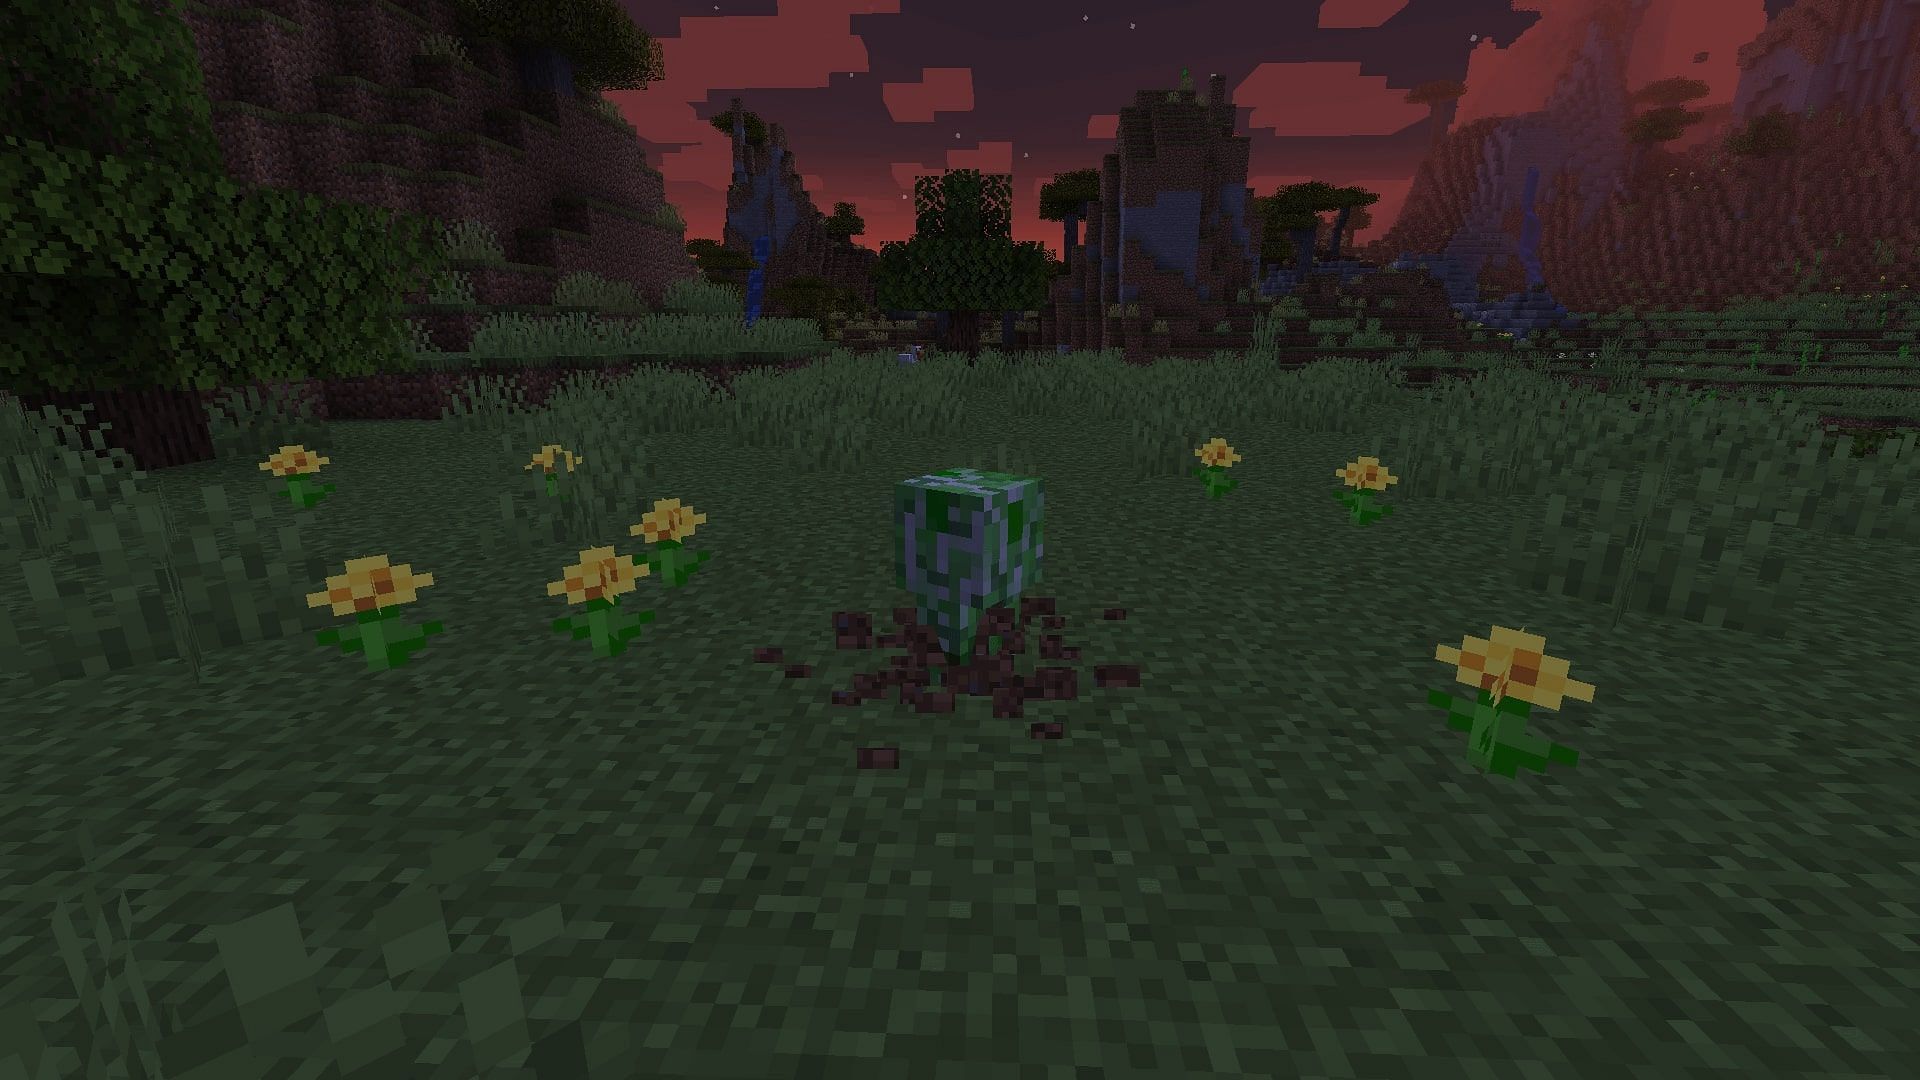 Minecraft mobs now have a proper spawn animation in this mod (Image via Tschipcraft/Modrinth)